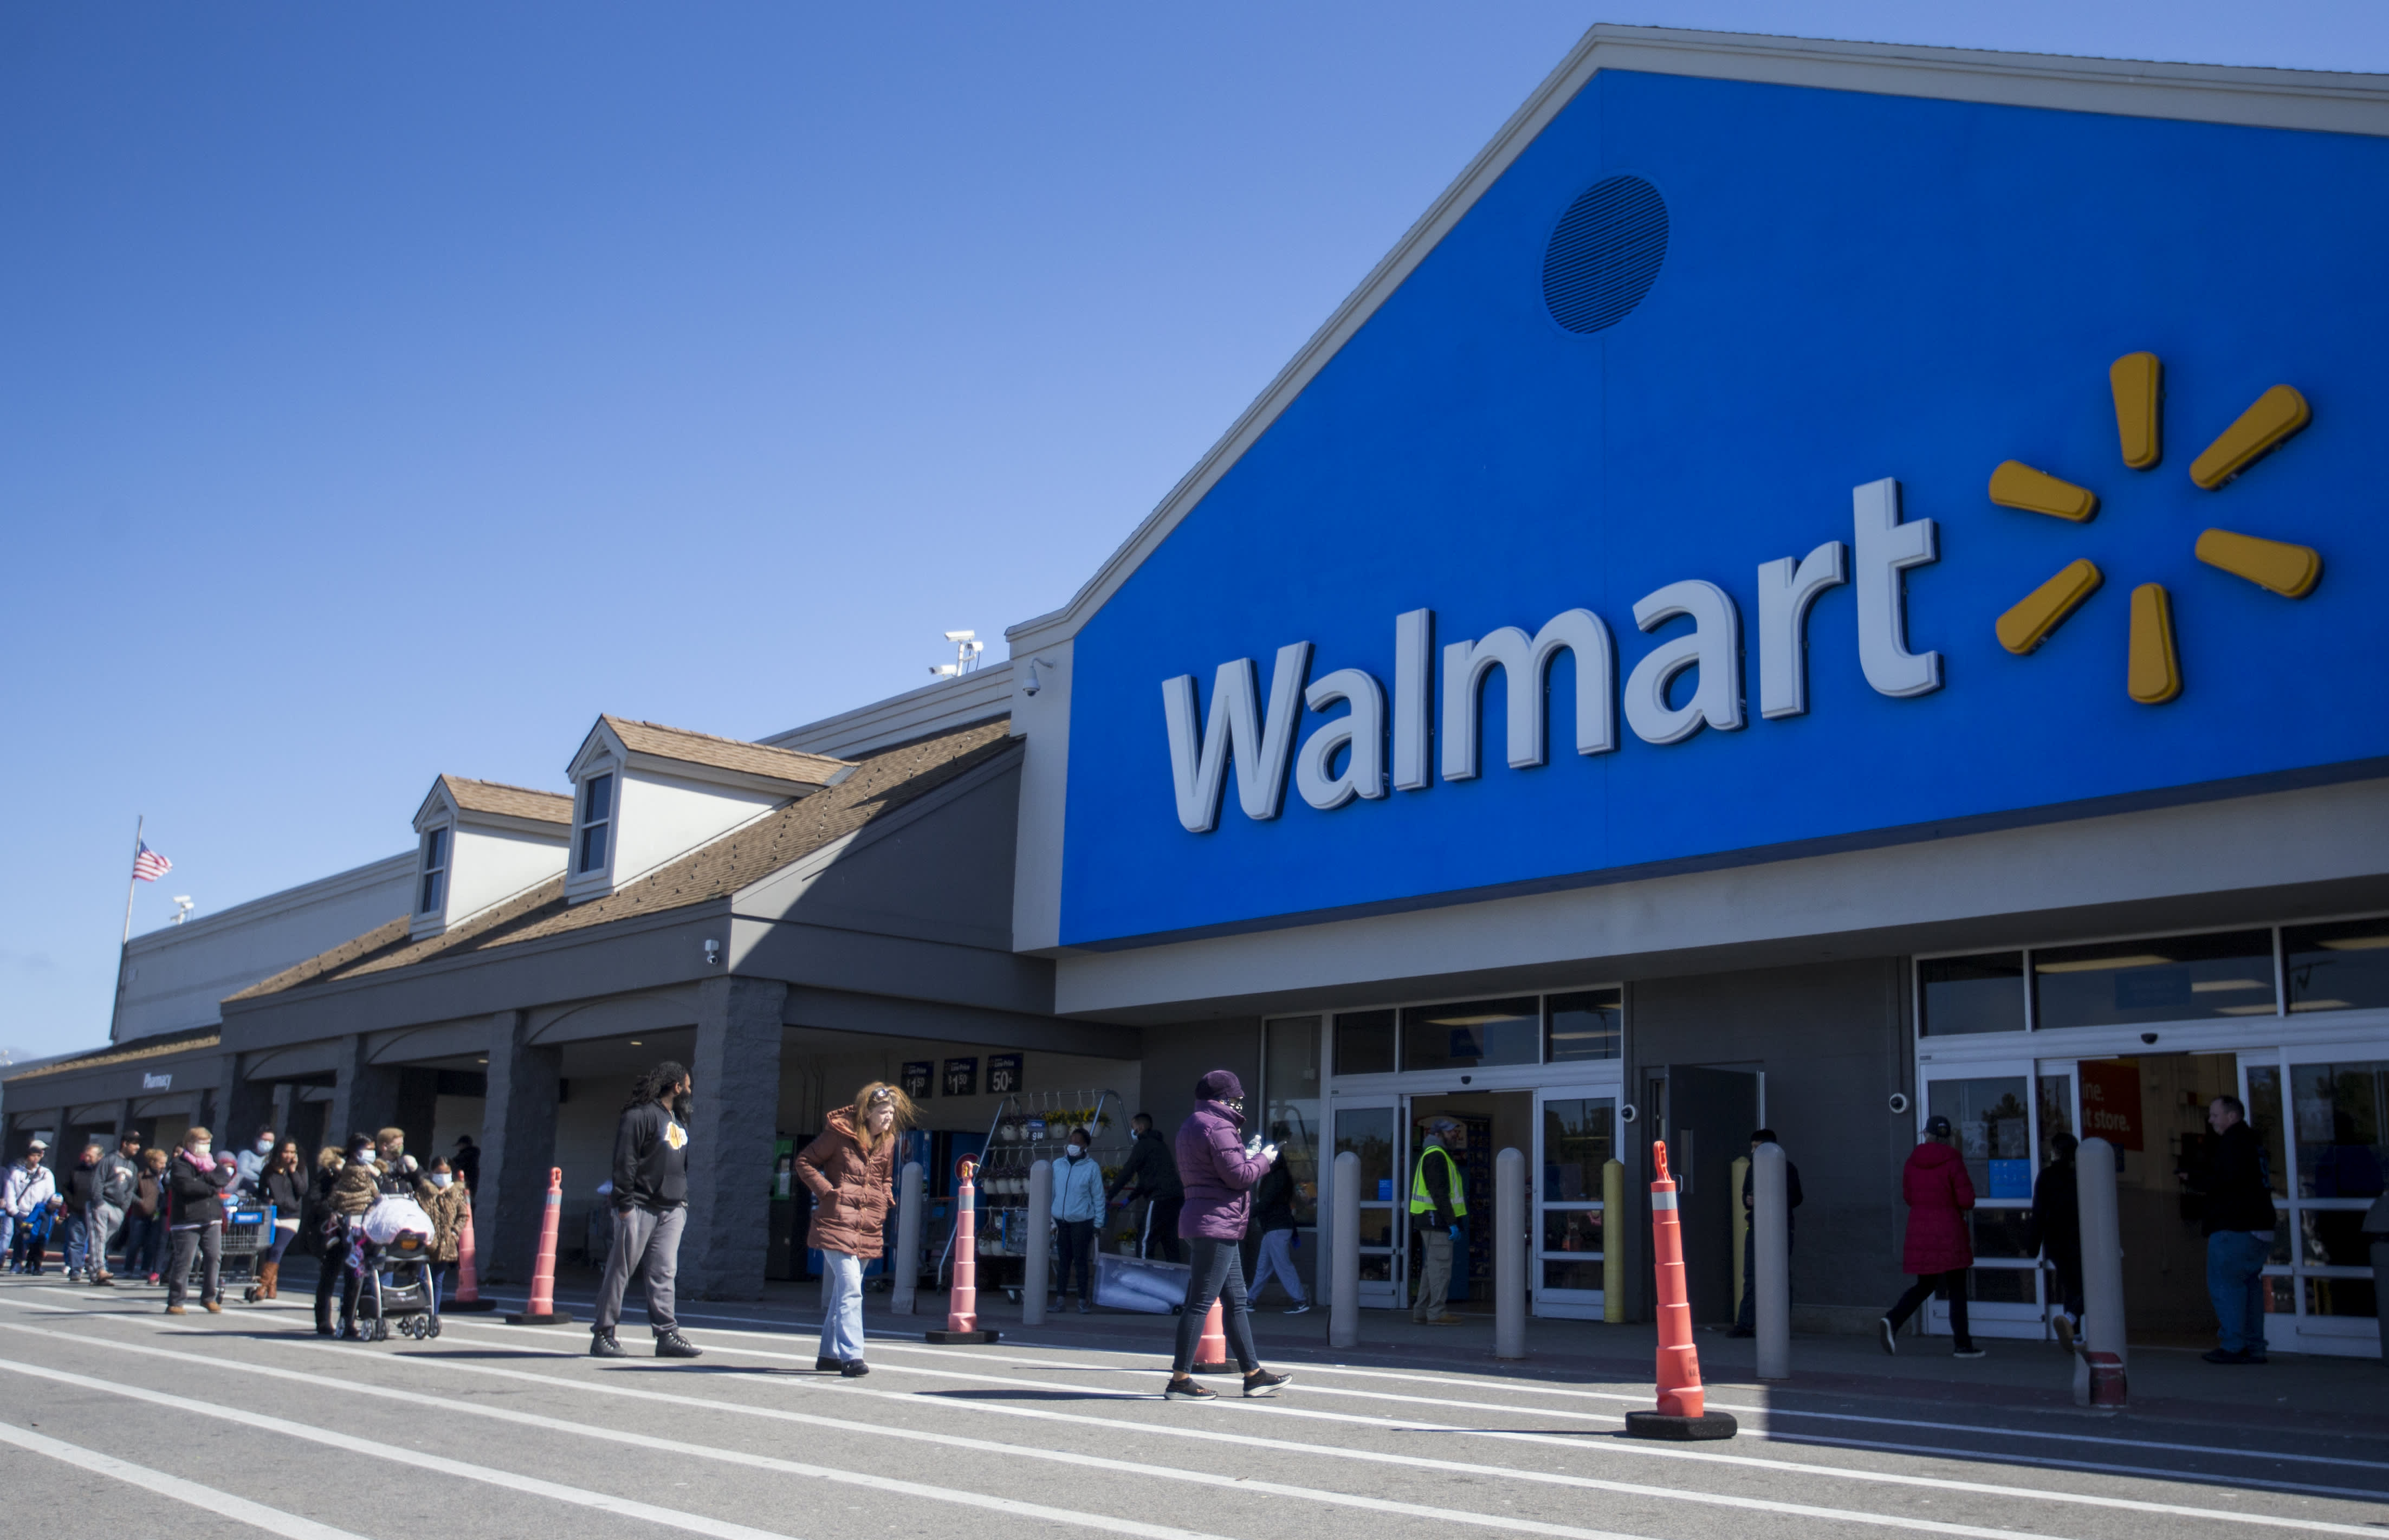 How To Call In Sick At Walmart In 2022? (Full Guide + FAQs)